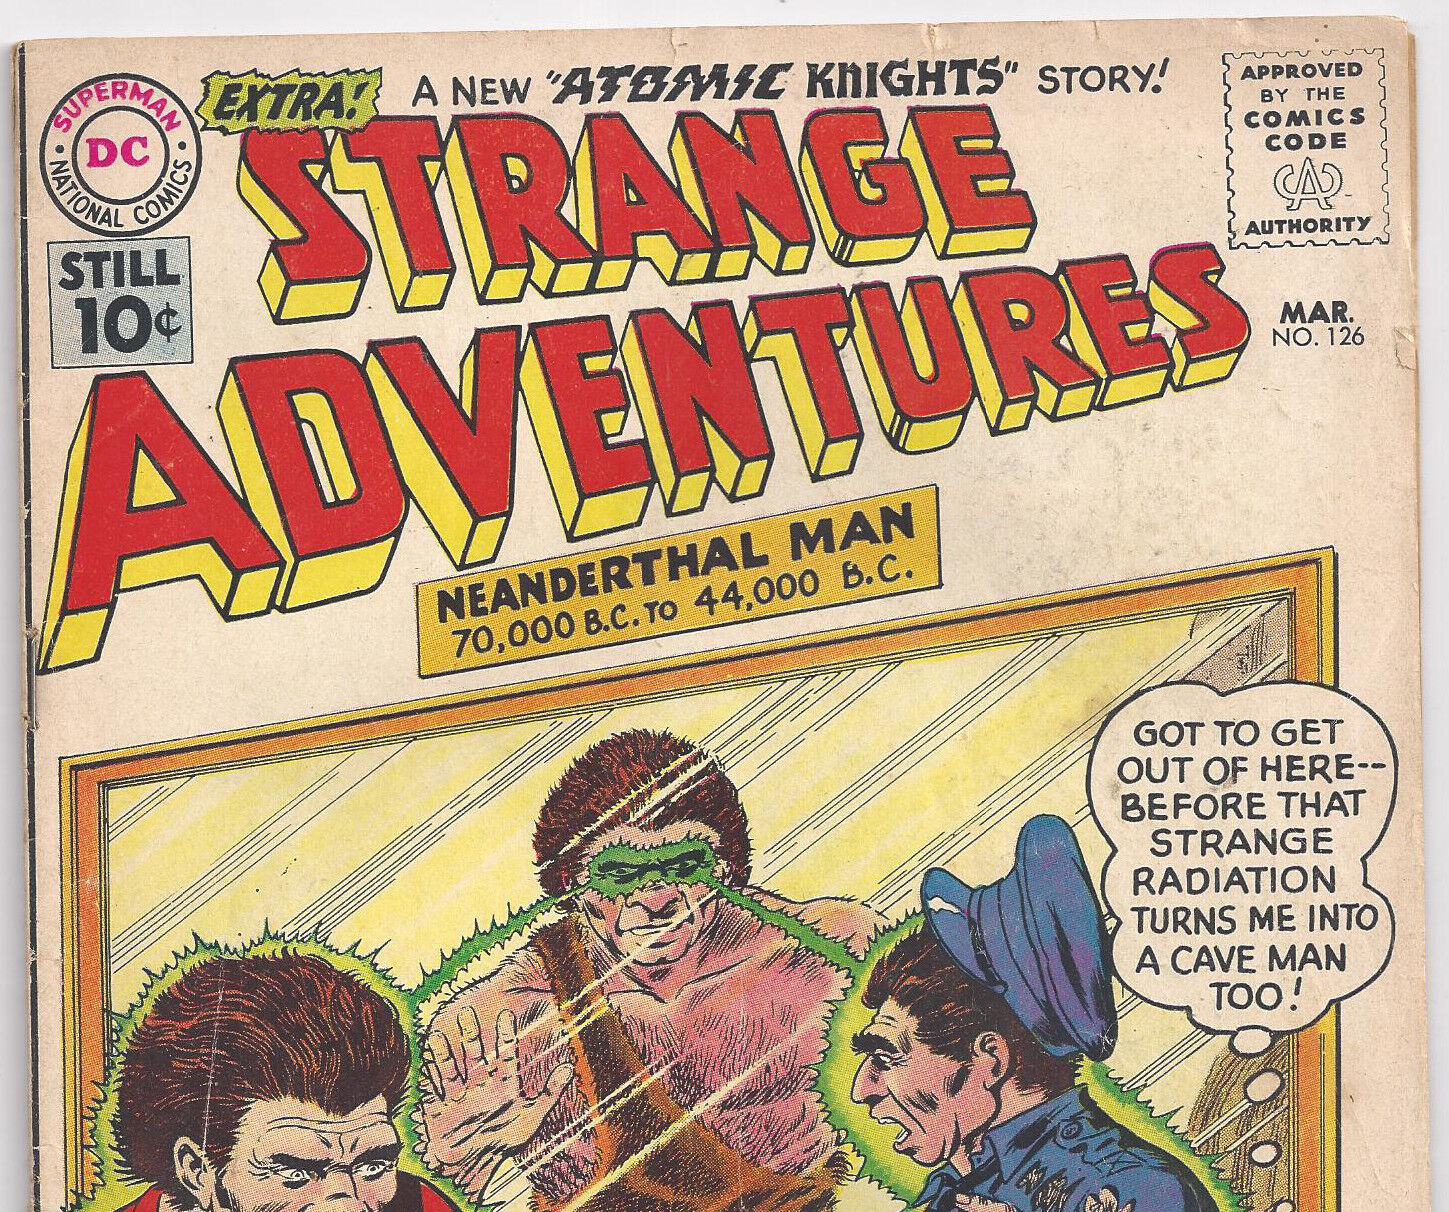 DC Comics Strange Adventures #126 Neanderthal Man from Mar. 1961 in VG- Con.